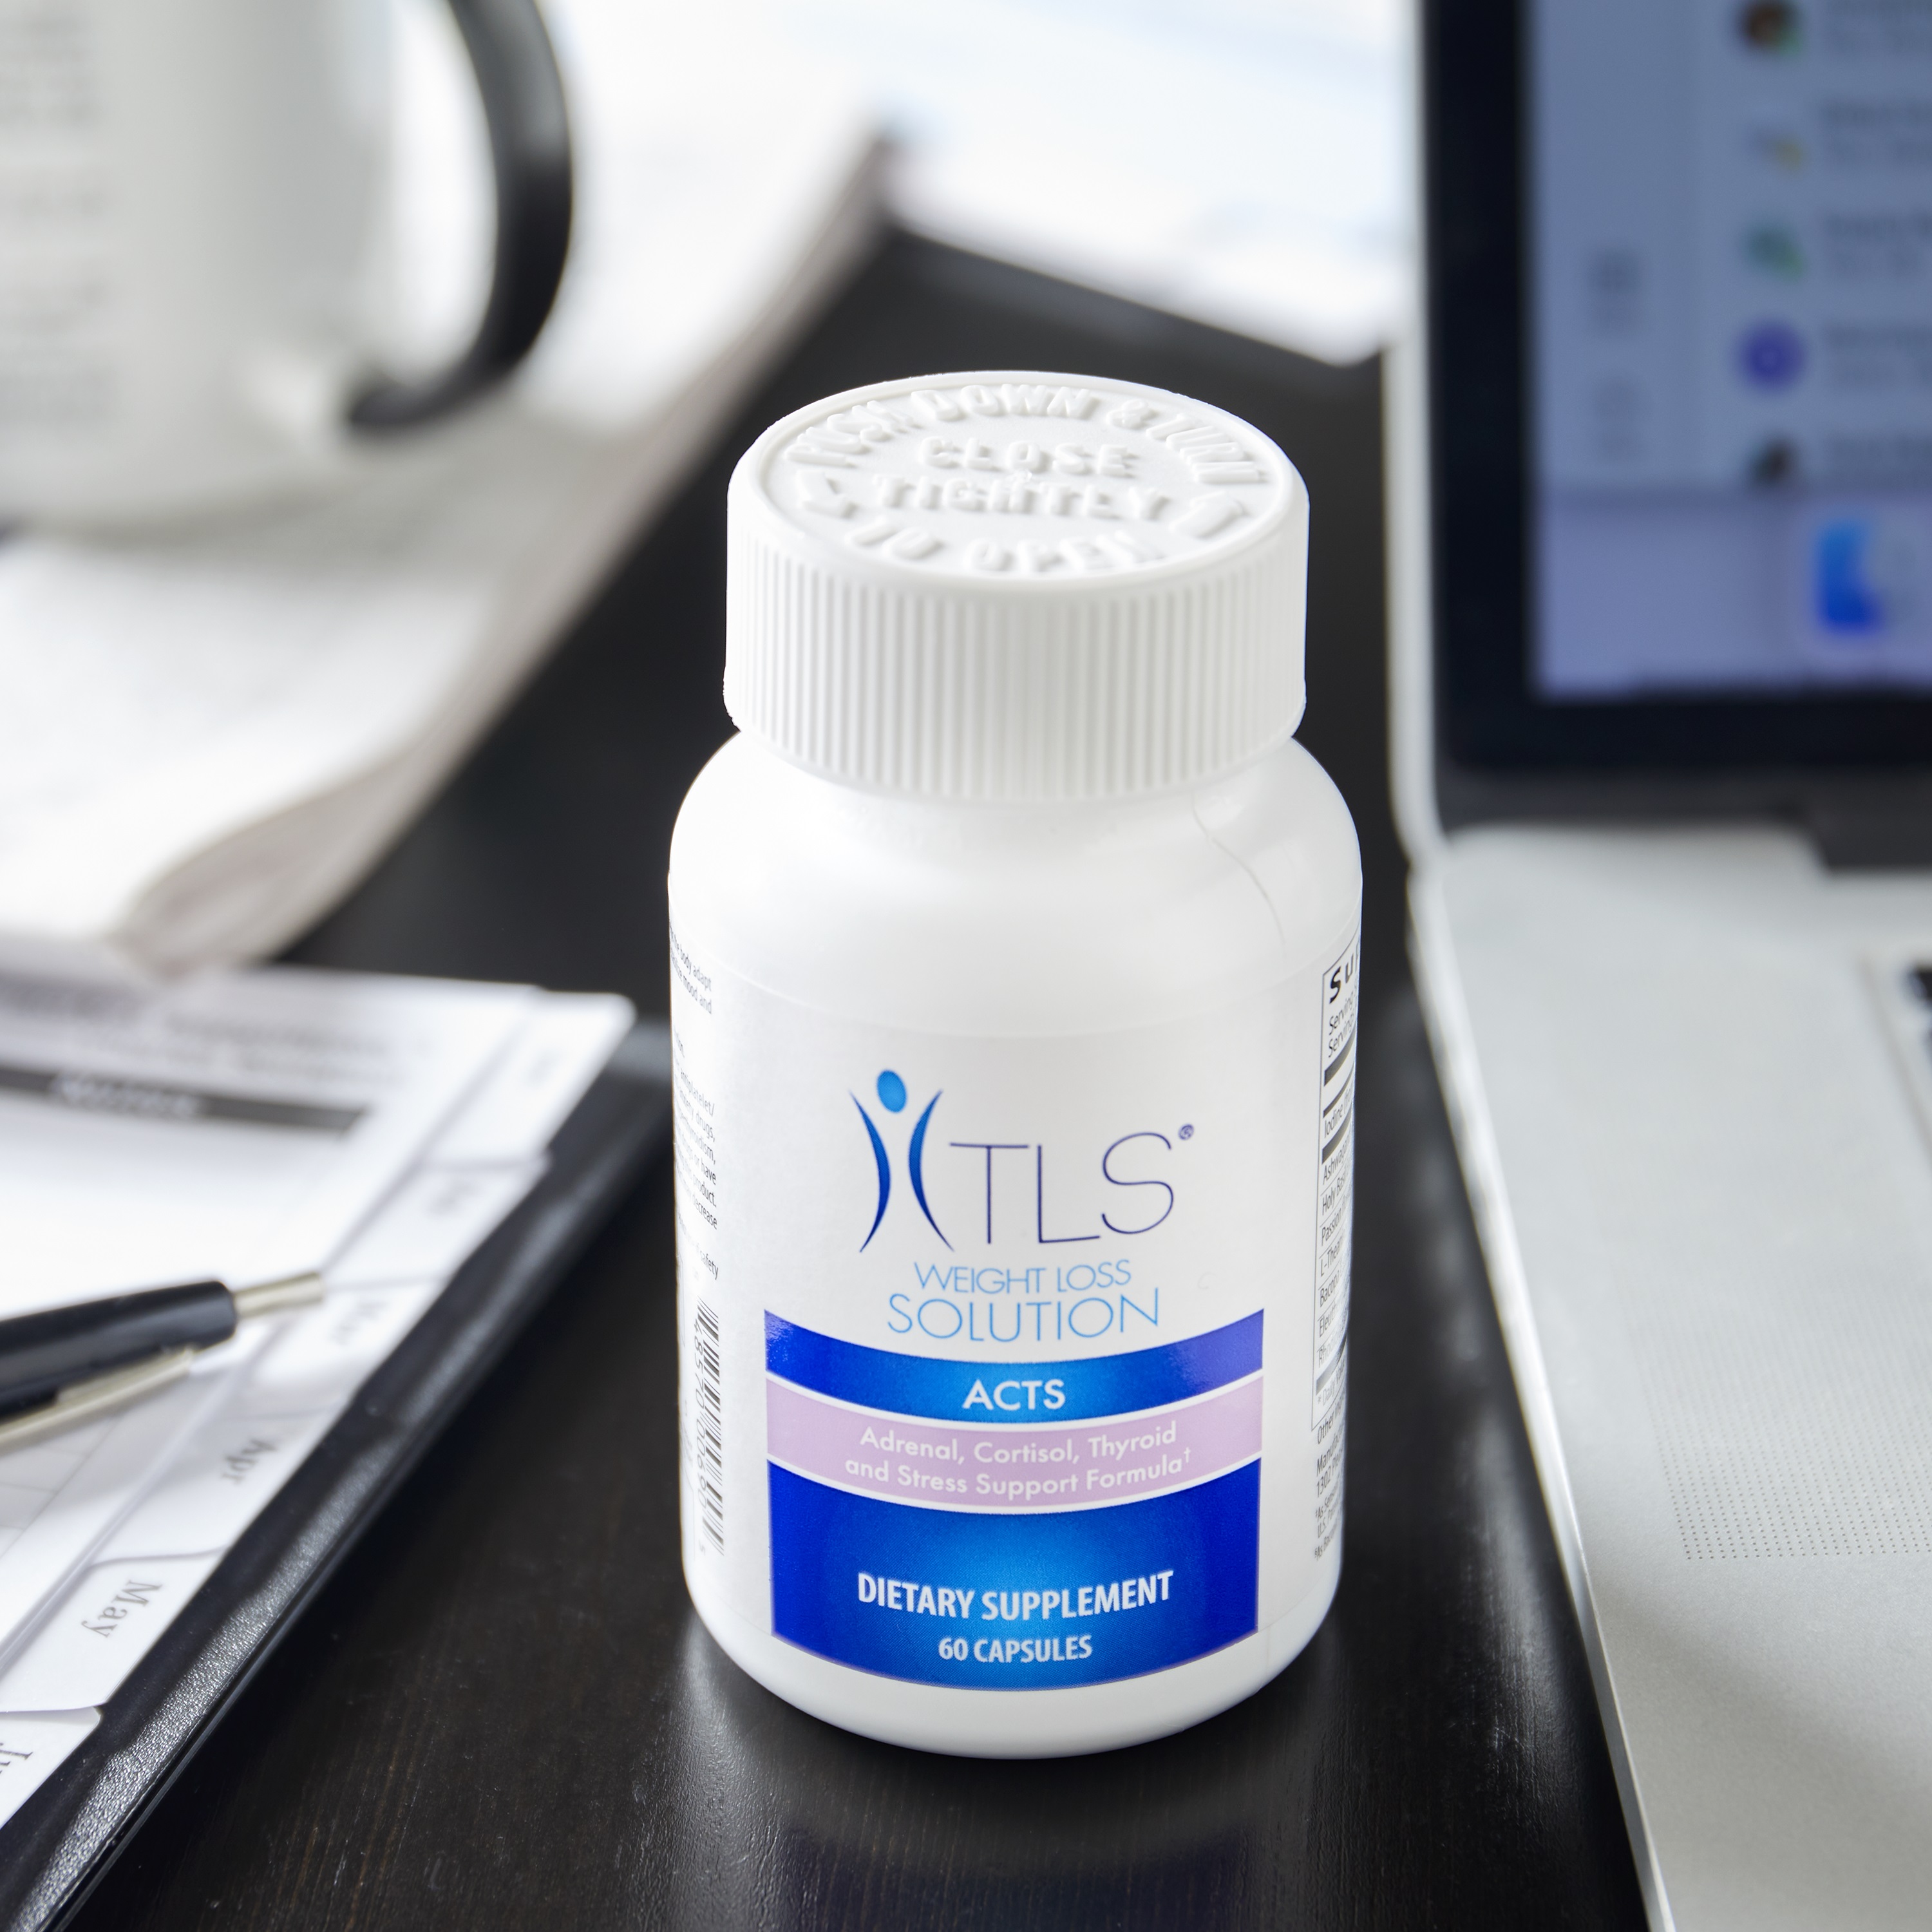 TLS ACTS Adrenal, Cortisol, Thyroid & Stress Support Formula contains 375mg of Holy Basil, 450mg of Ashwagandha, 200mg of L-theanine and 50 mg of Rhodiola. More than some other brands.